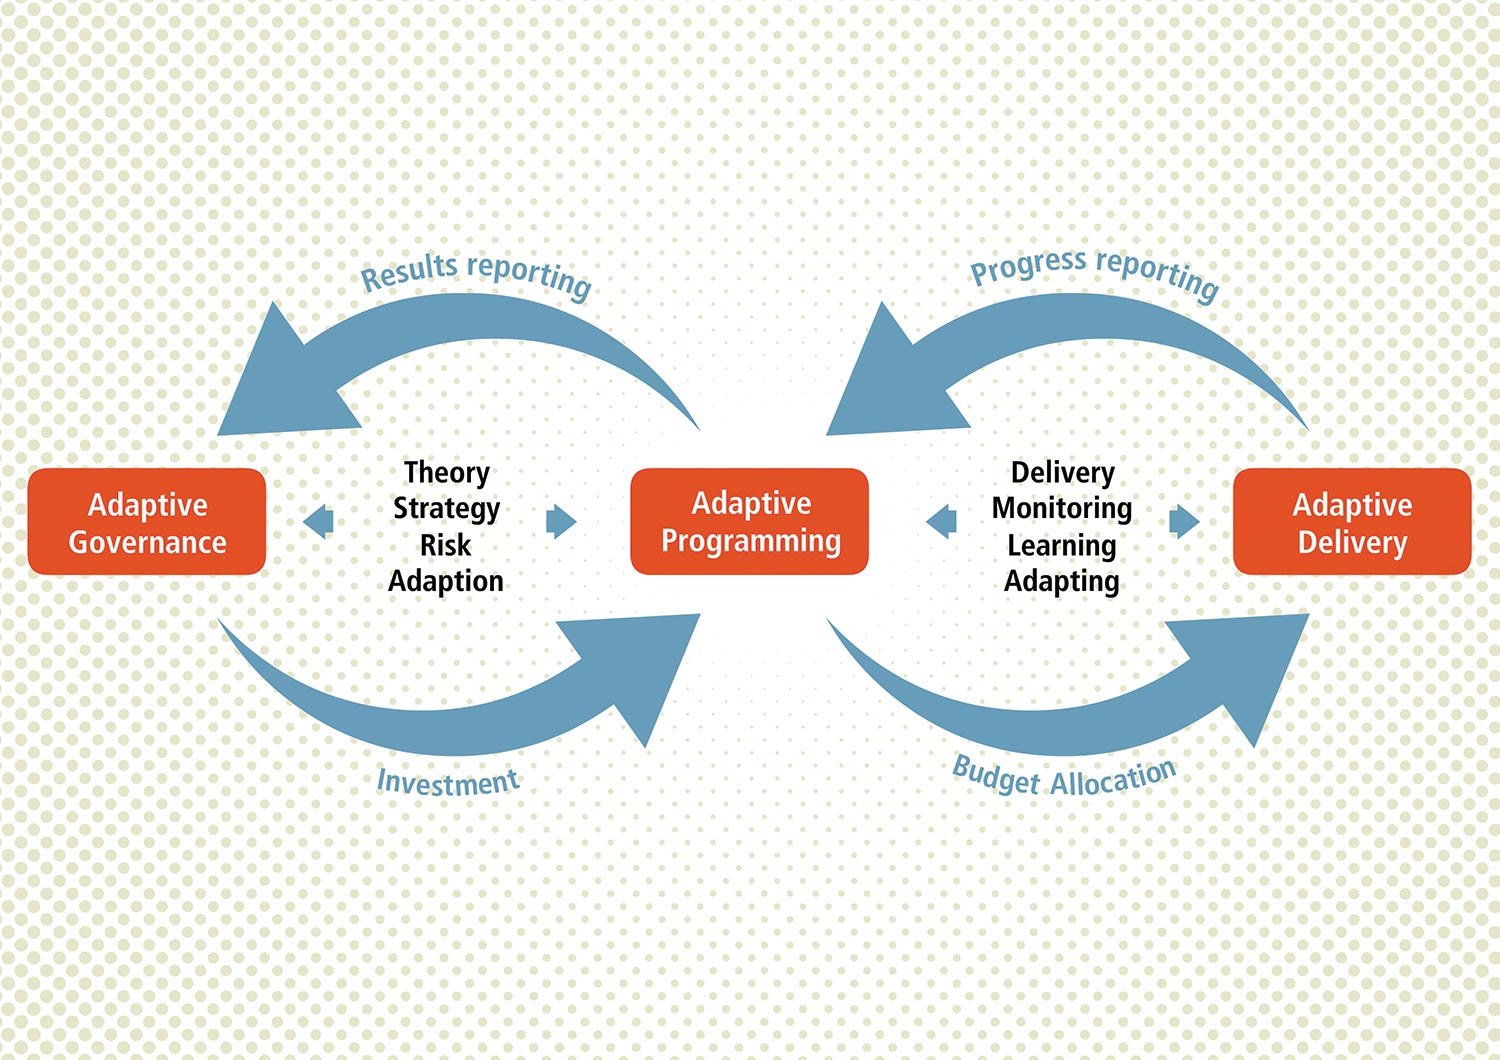 Adaptive delivery methodology